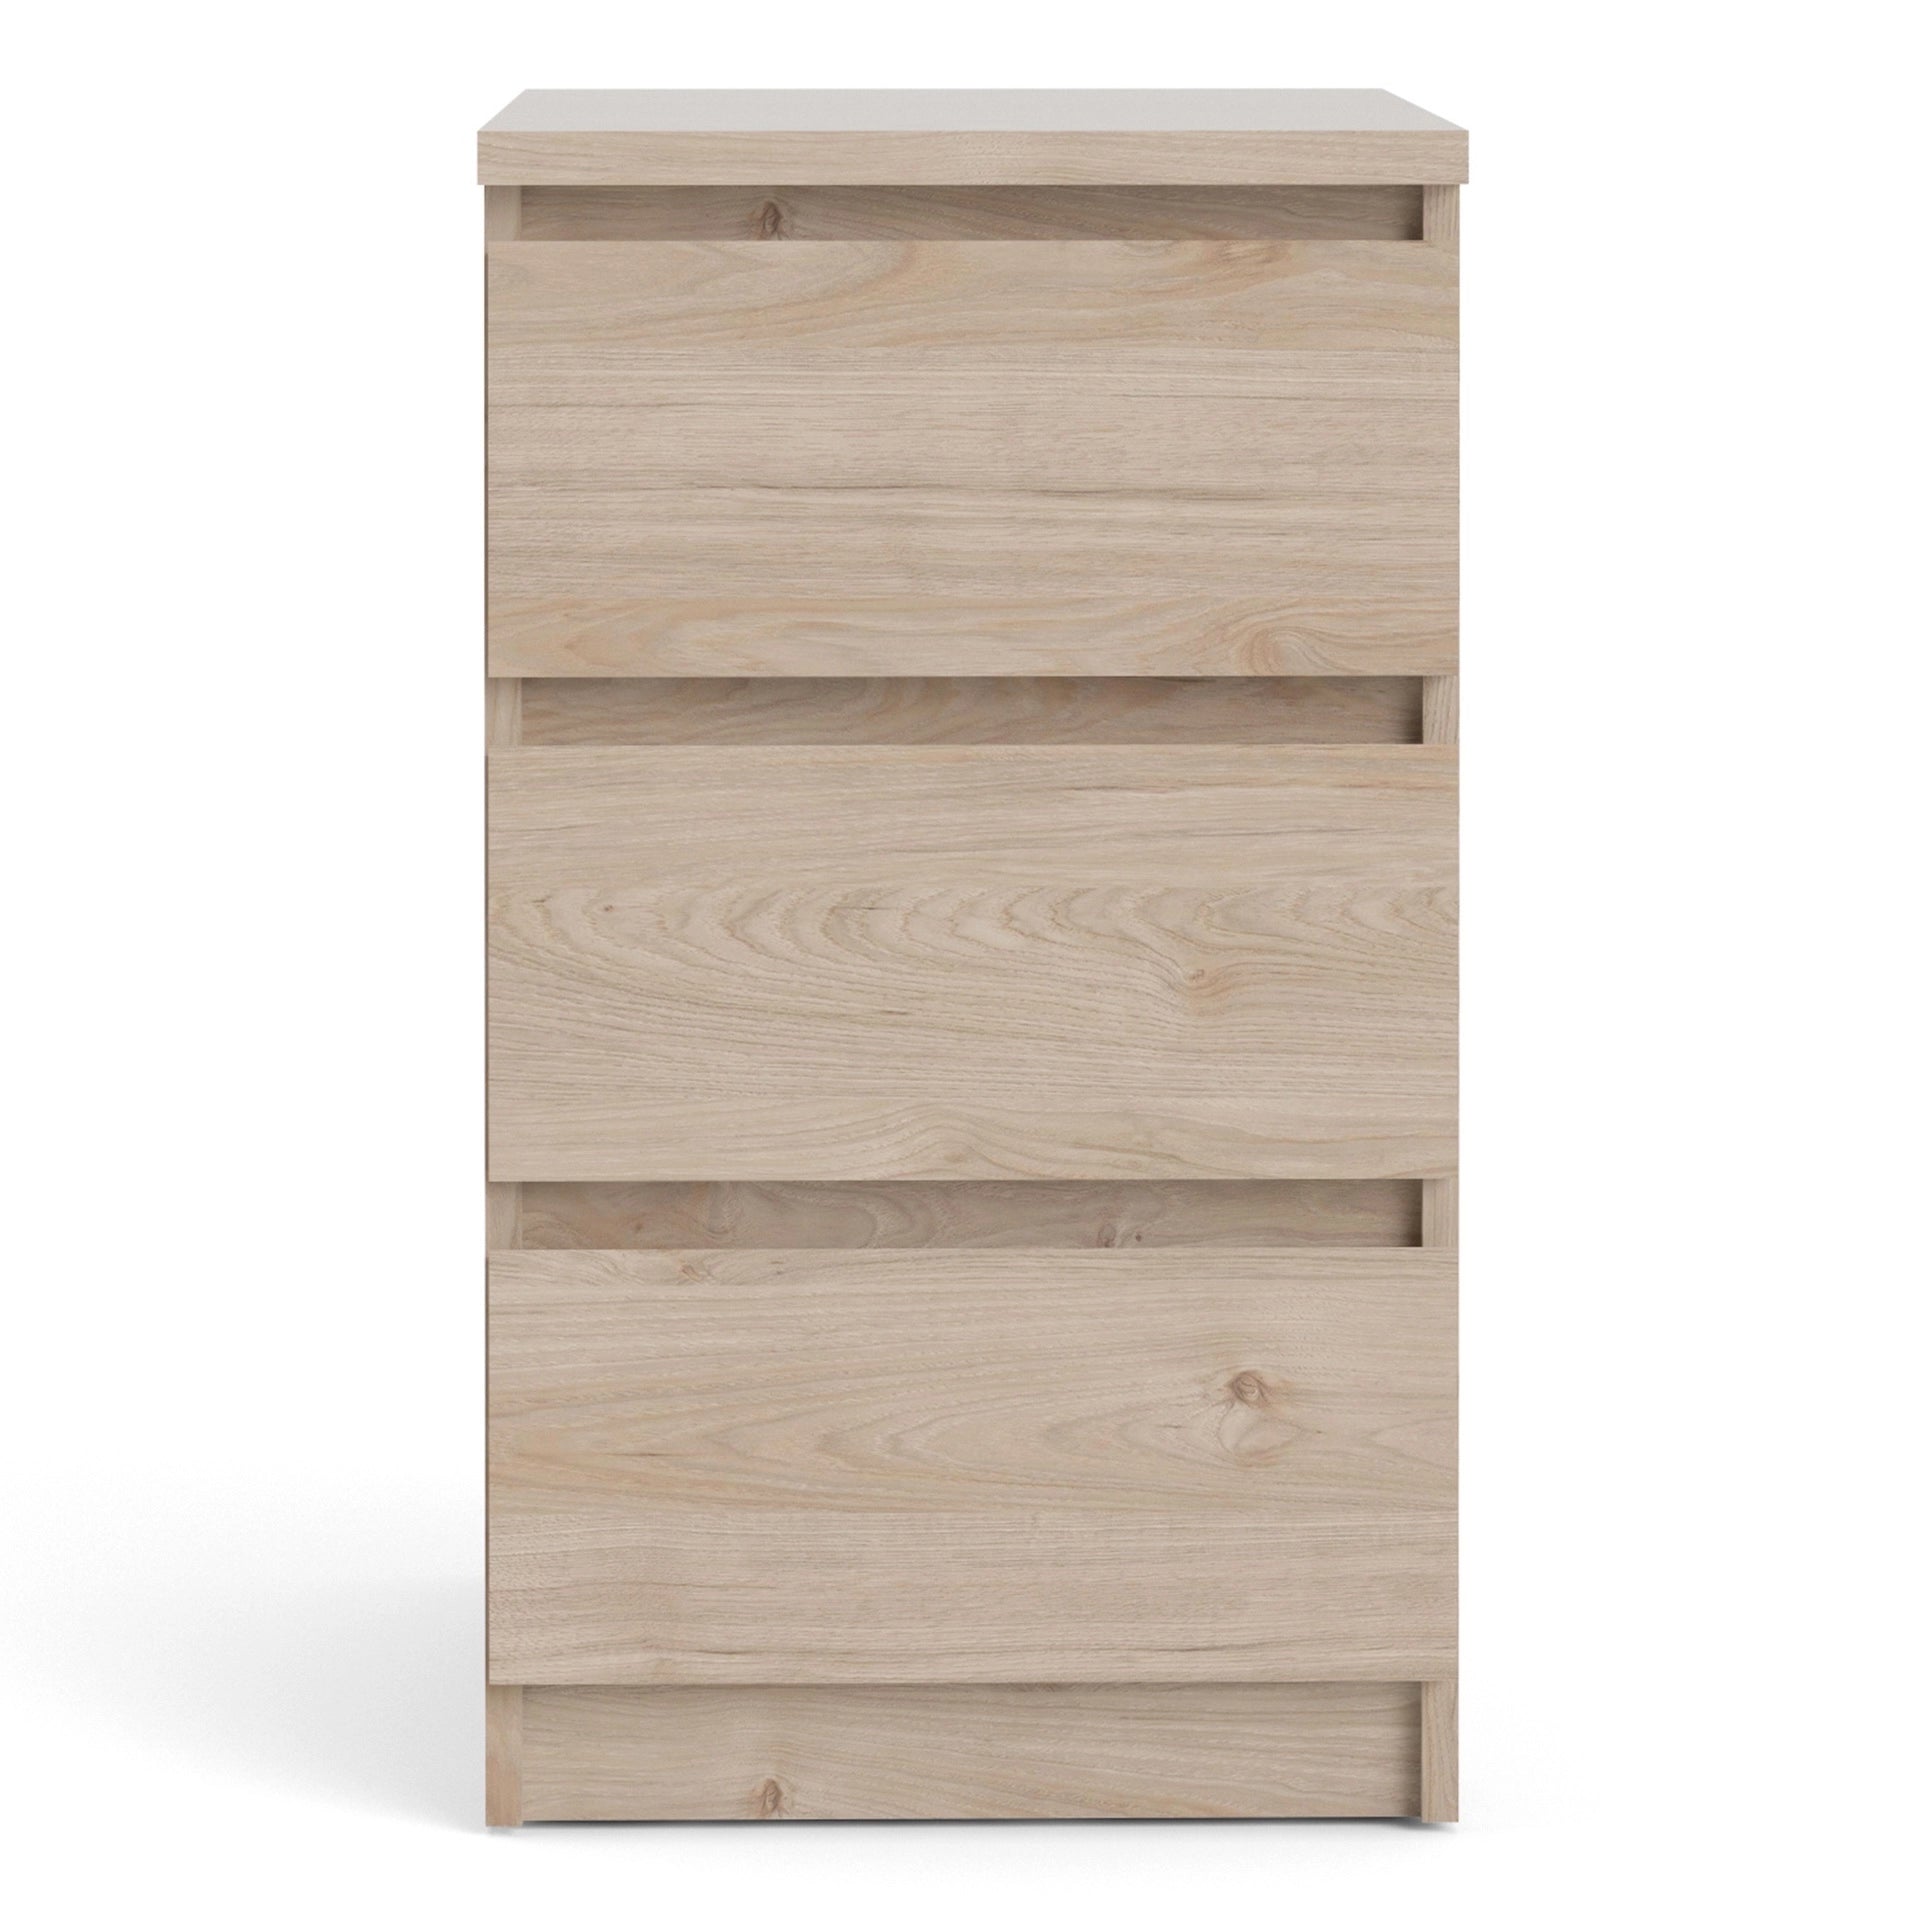 Furniture To Go Naia Bedside 3 Drawers in Jackson Hickory Oak